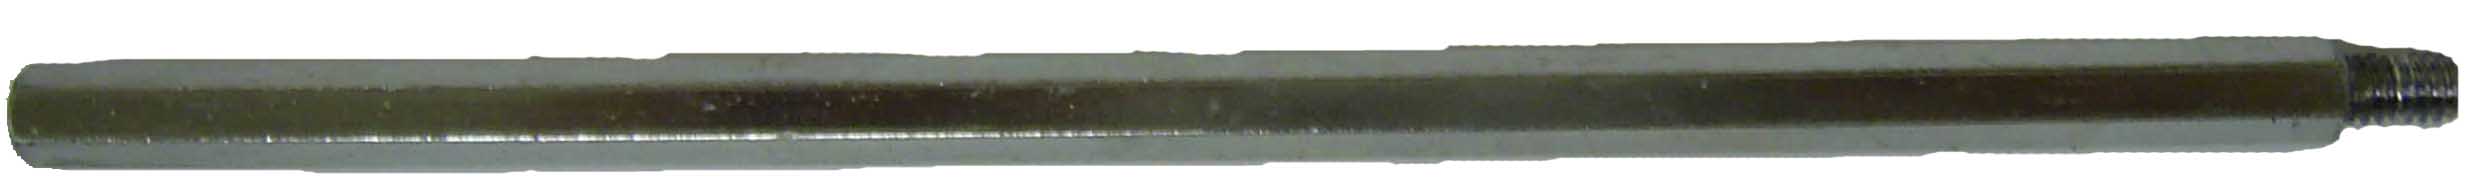 MOUNTING BOLT: 15A-002